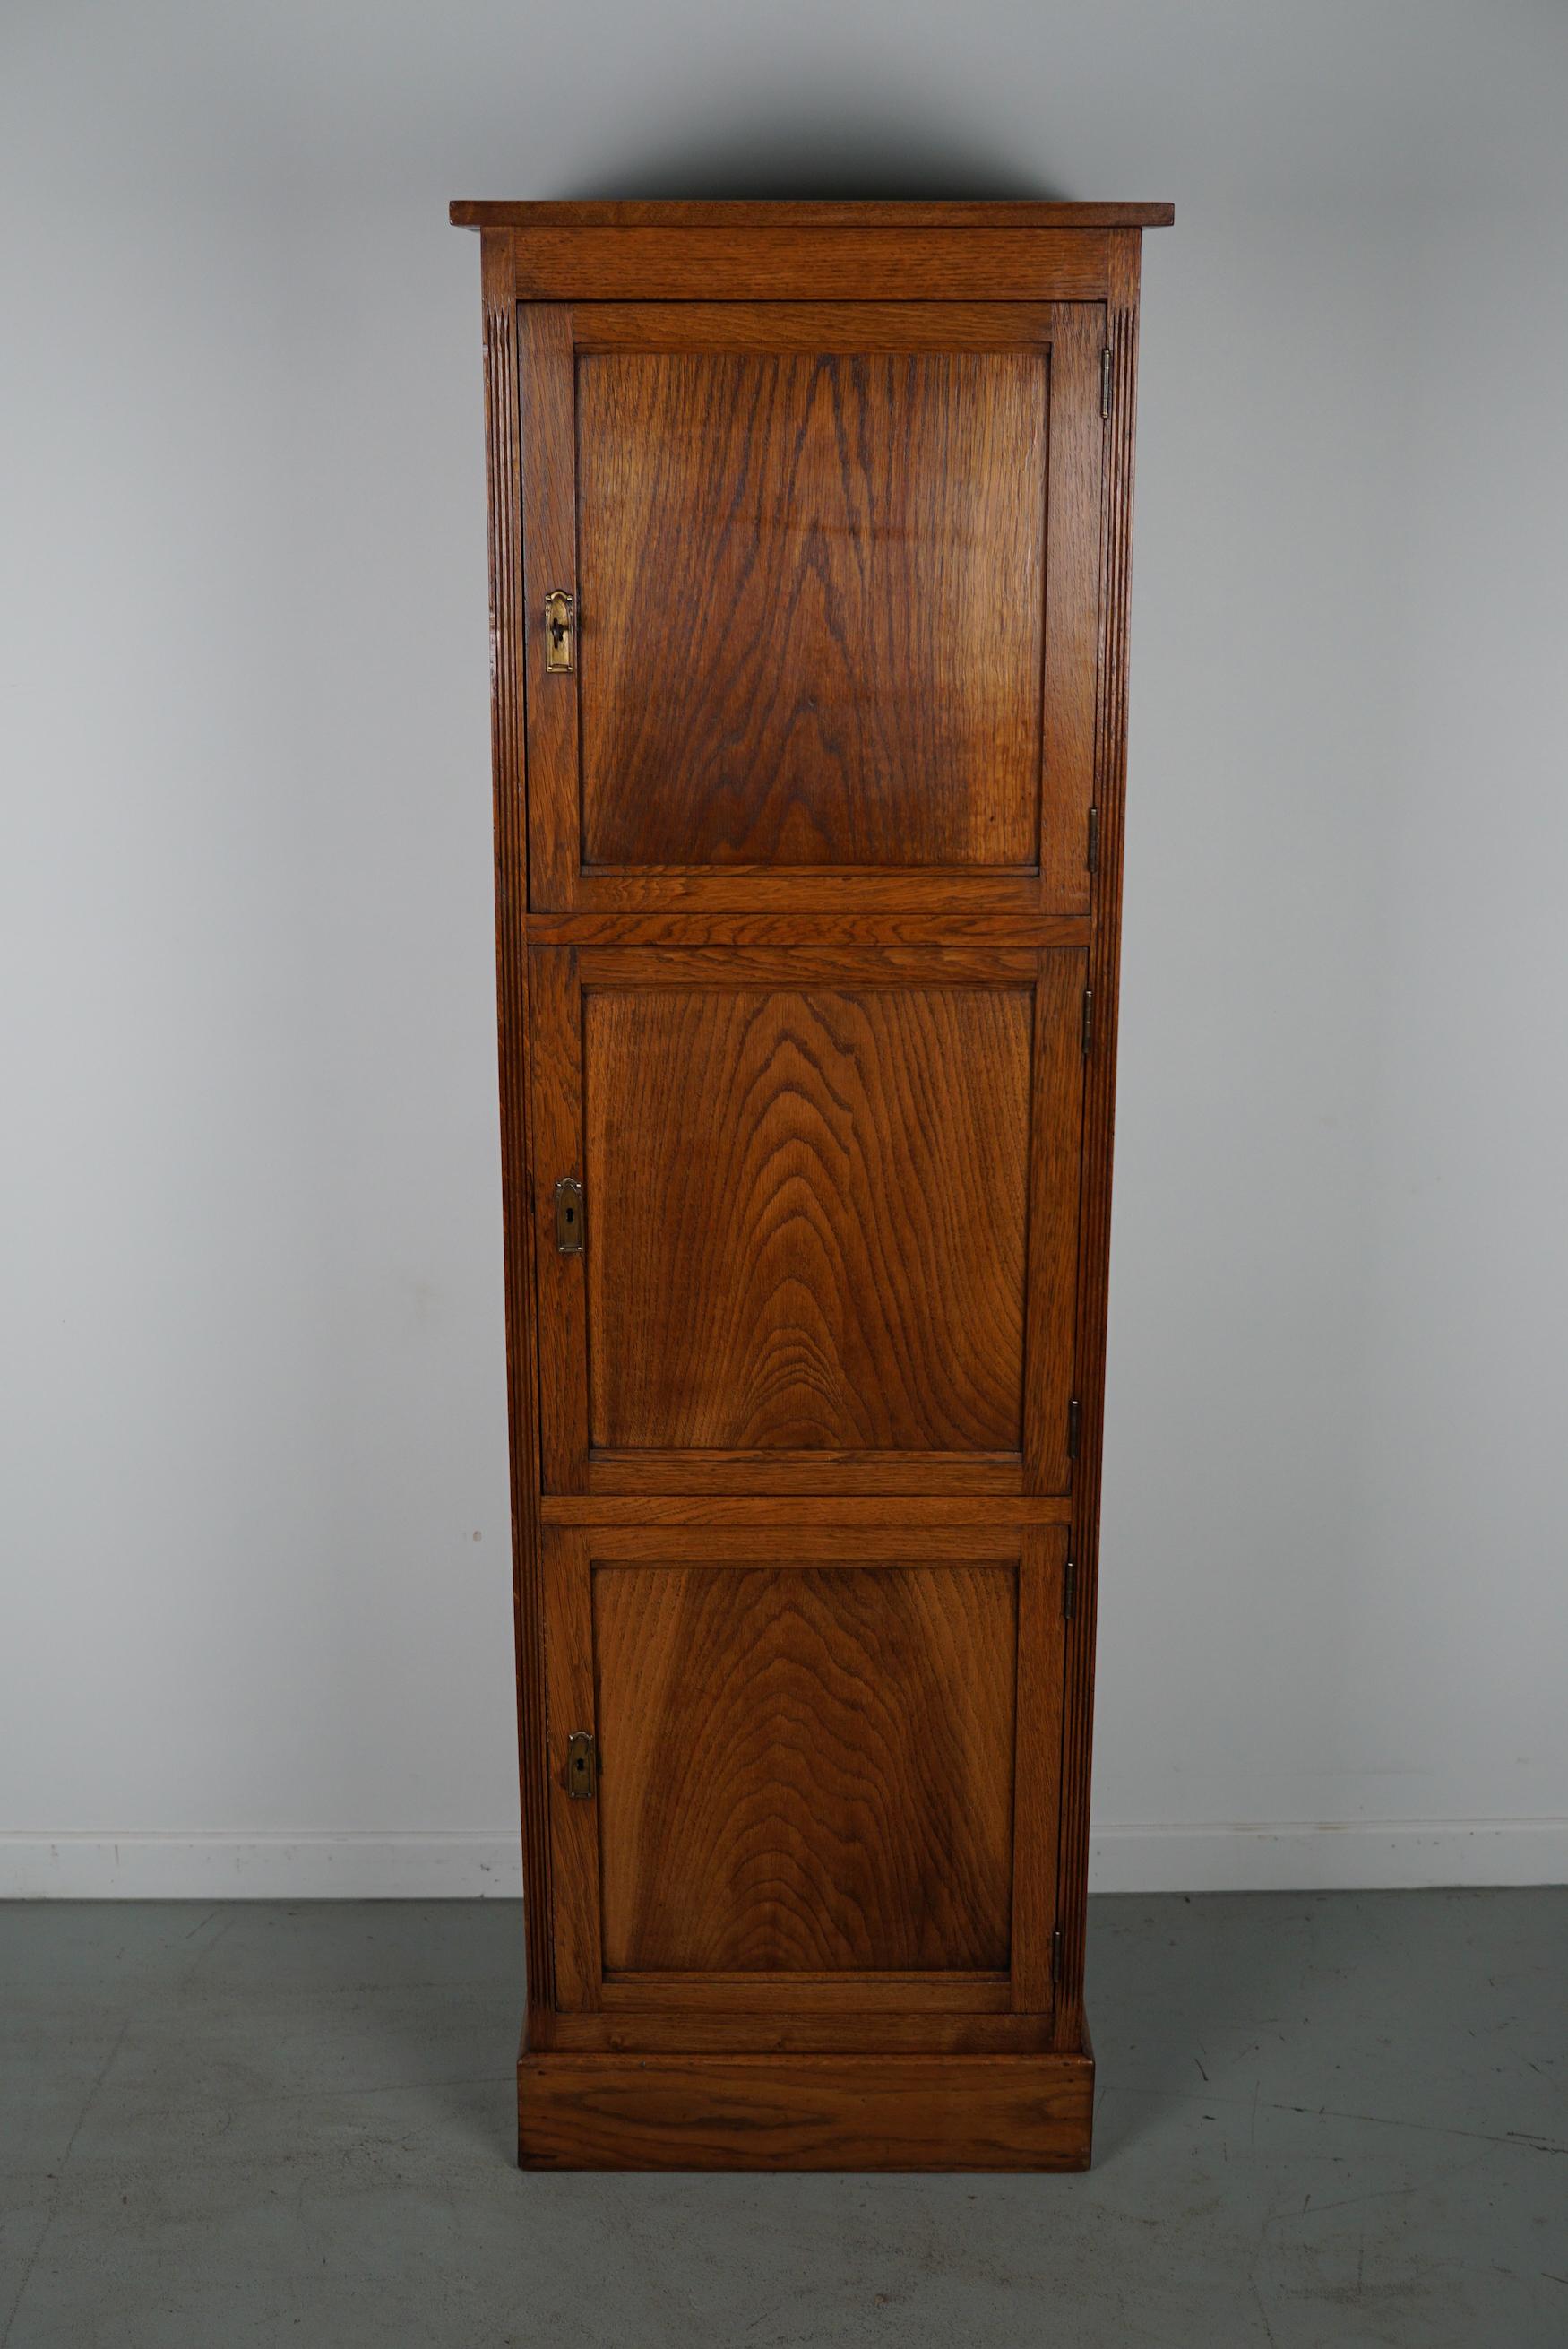 This Dutch oak locker / filing cabinet with 3 doors was made around the 1920/30s in the Netherlands. The interior dimensions of the compartments are: D W H 38 x 40 x 8 cm.